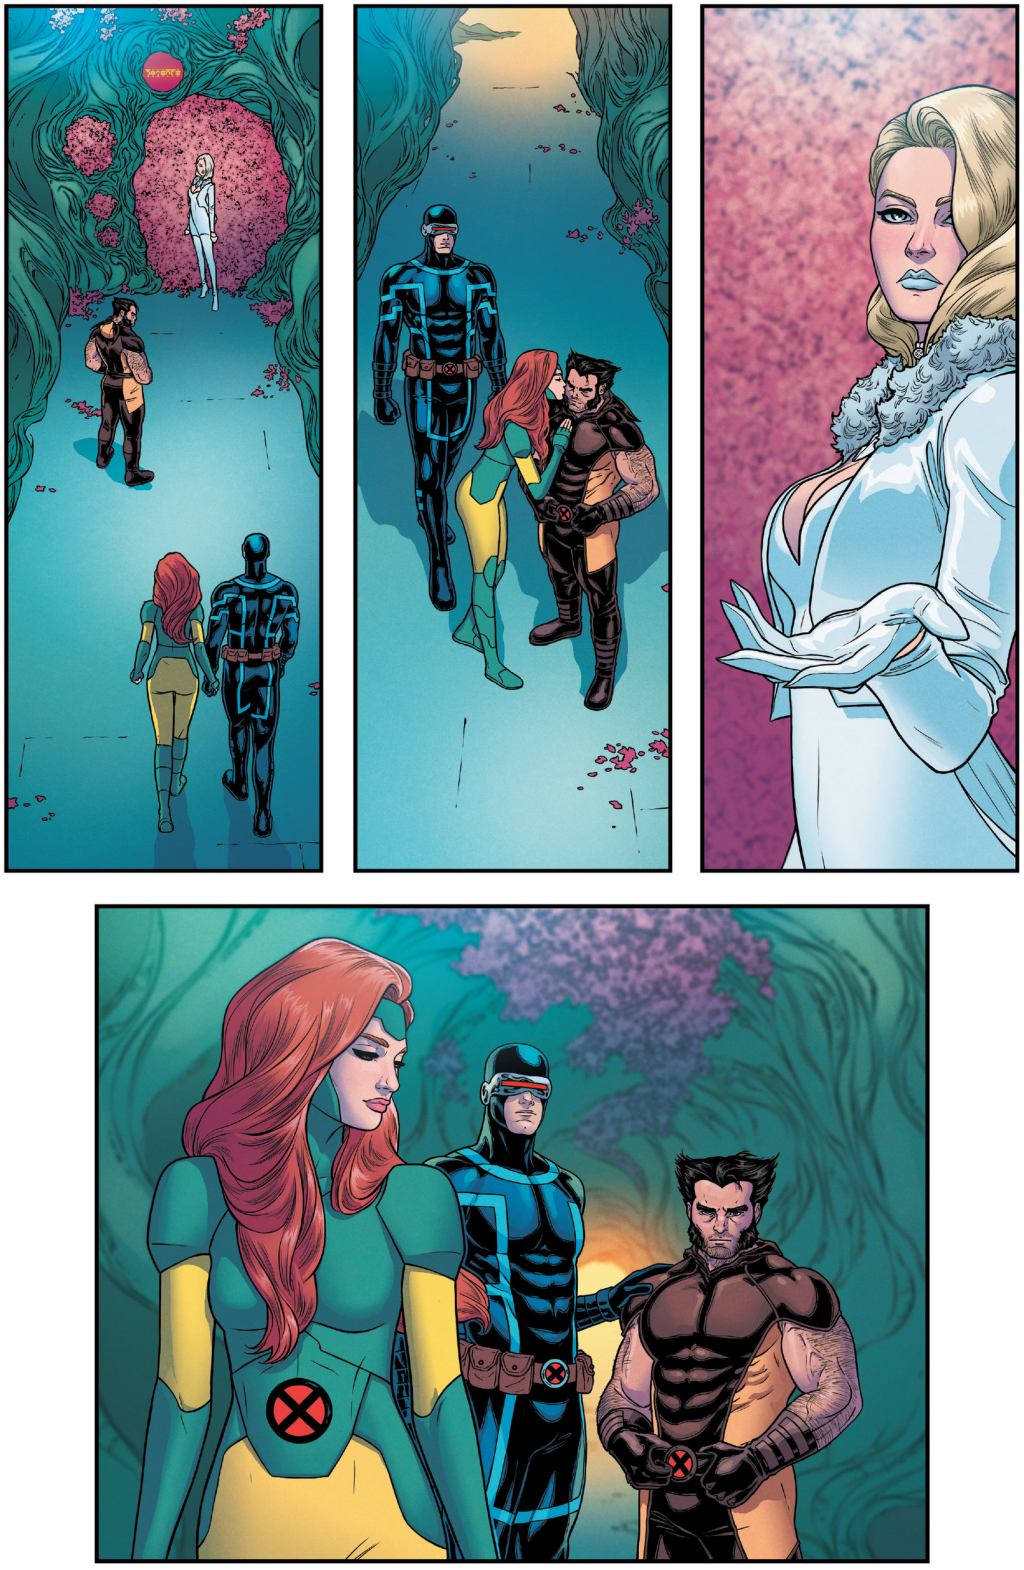 Jean Grey says what could be her last good-bye to both Cyclops and Wolverine in Giant-Size X-Men: Jean Grey and Emma Frost Vol. 1 #1 "Into the Storm" (2020), Marvel Comics. Words by Jonathan Hickman, art by Russell Dauterman, Matthew Wilson, and Clayton Cowles.